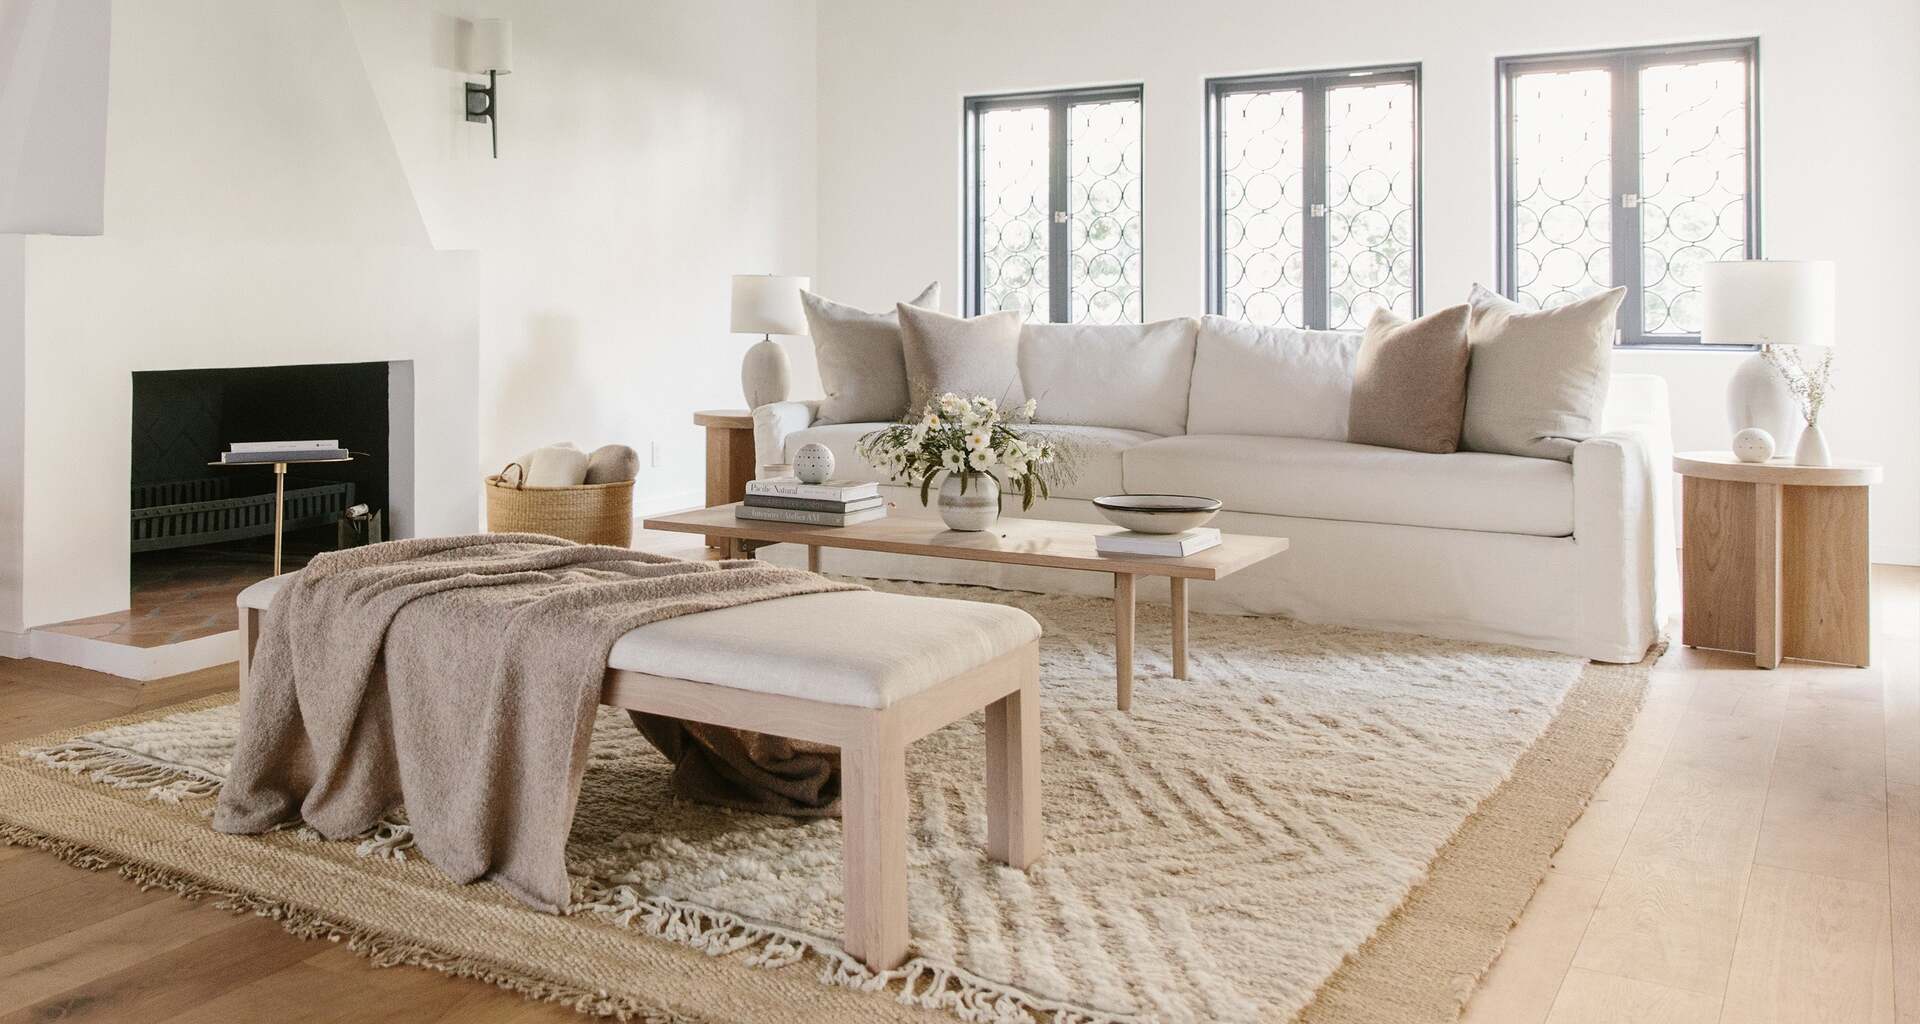 Where To Buy Rugs For Living Room